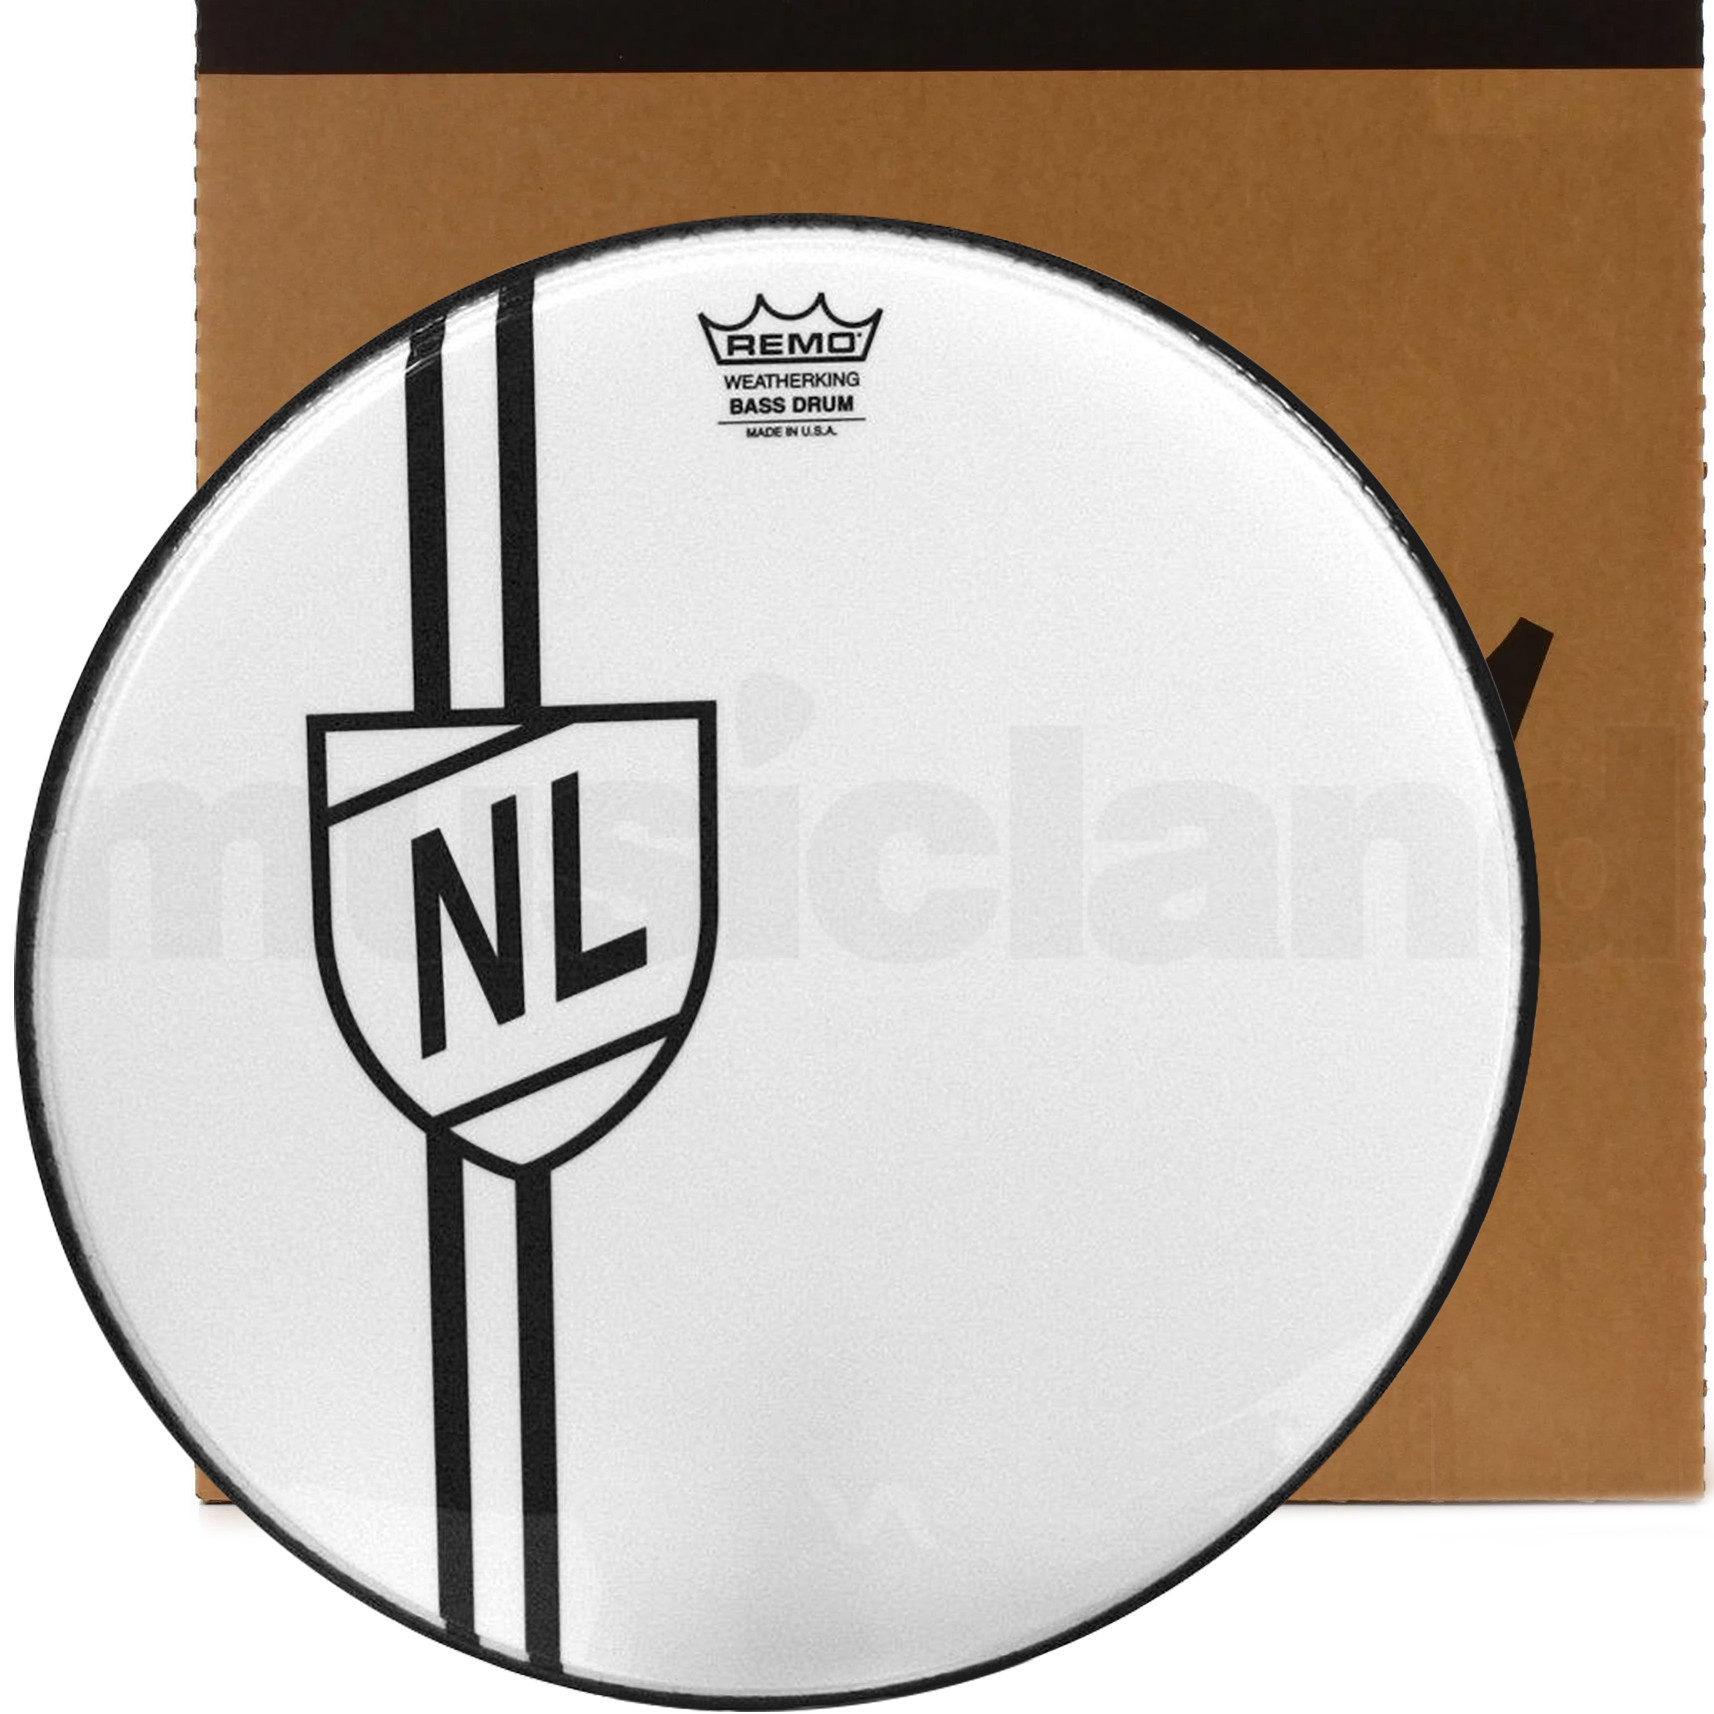 With Pre-Pack Decal Letters 20 Diameter 'Vintage Shield' Graphic REMO Bass Graphic Standard 